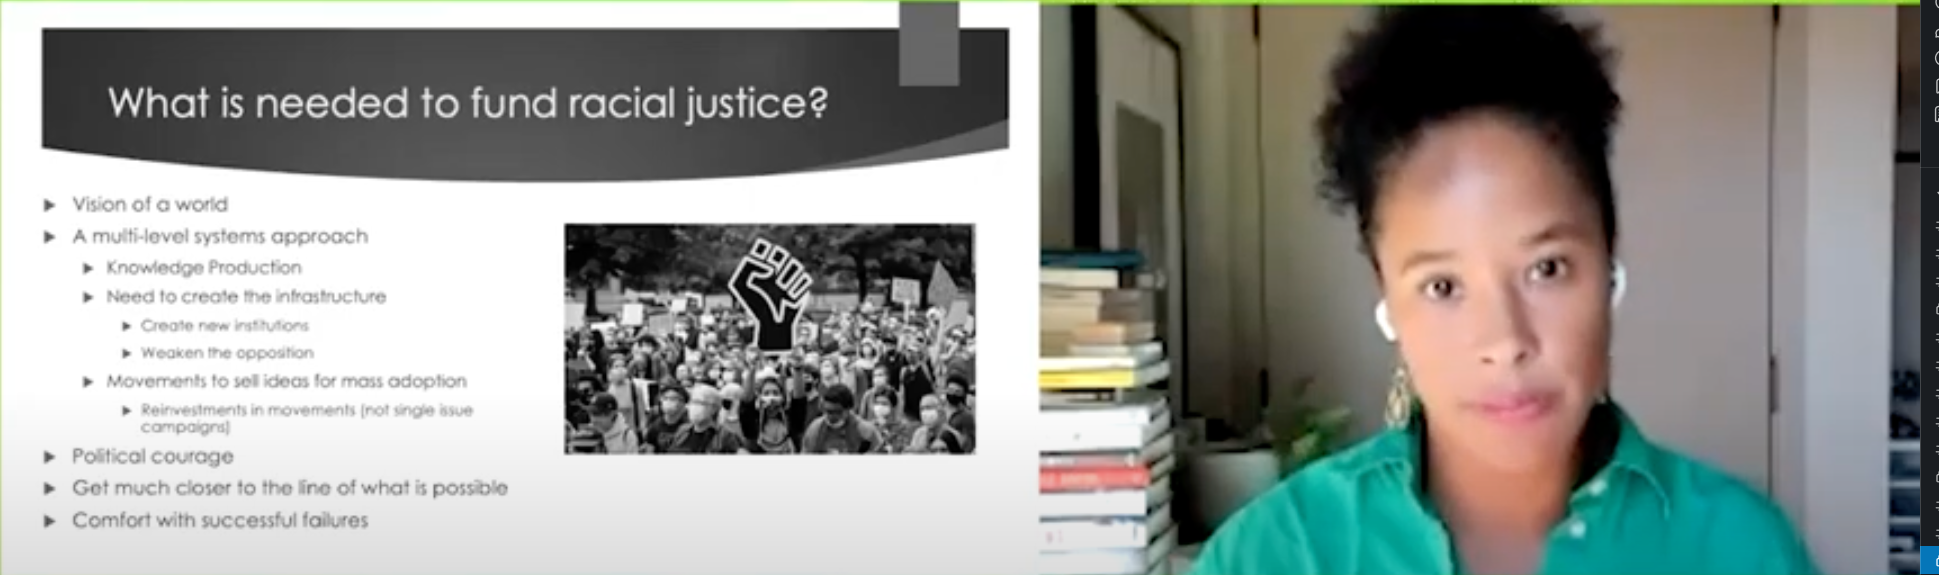 Screengrab from Dr. Megan Ming Francis's presentation. On the left half is a presentation slide titled, "What is needed to fund racial justice?" On the right hand side is Dr. Megan Ming Francis looking into the camera. She is wearing a green button down, AirPods, and has books stacked in the background. 